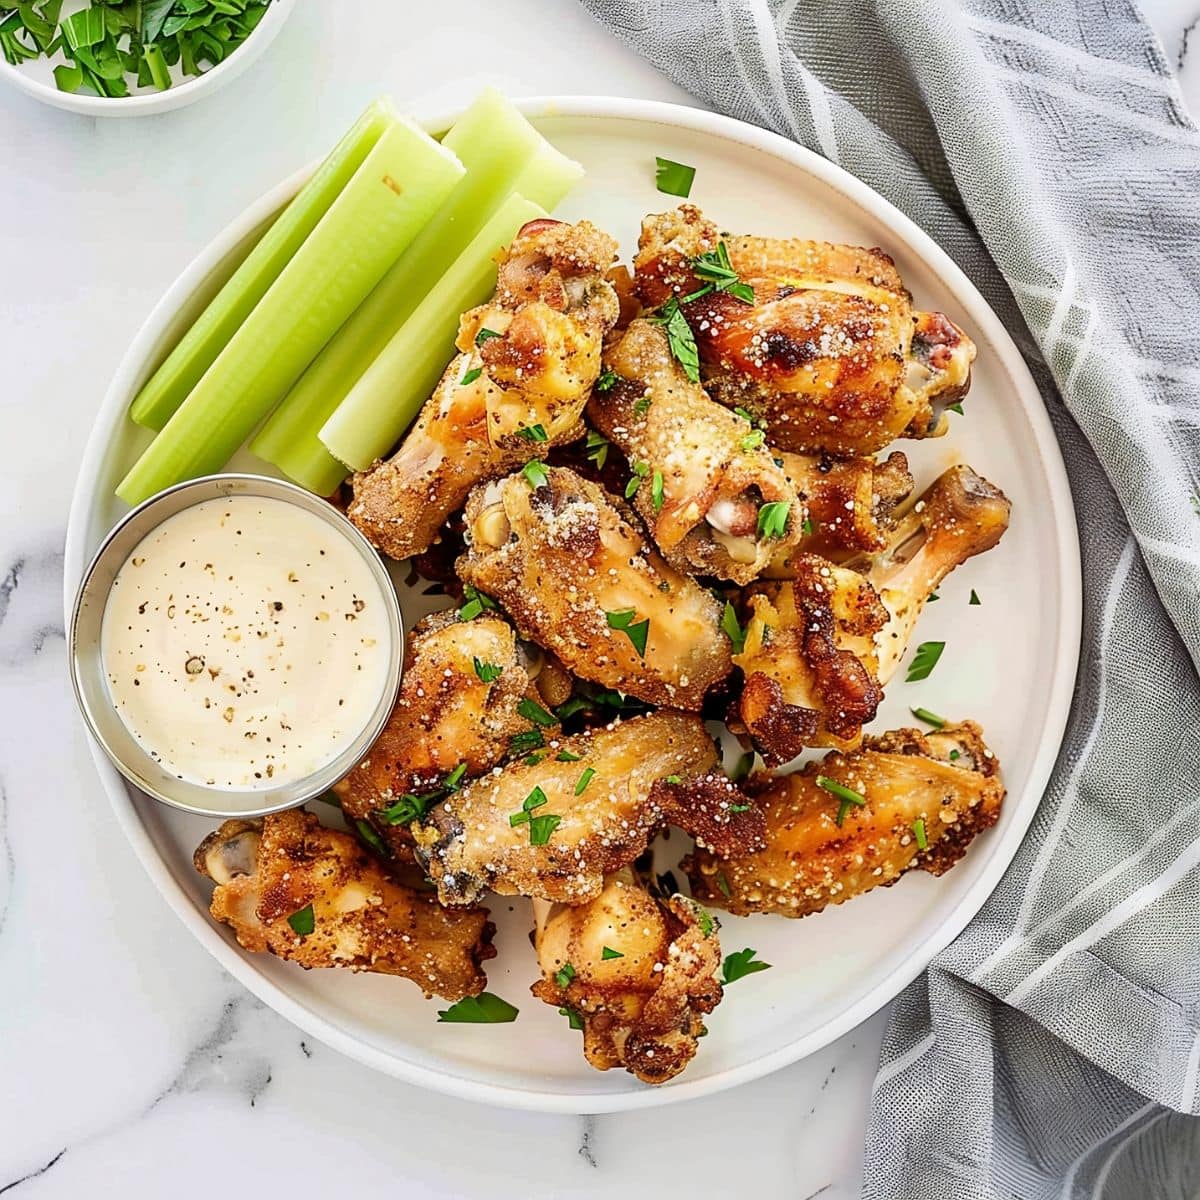 Pile of Wingstop Garlic Parmesan Wings on a Plate with Celery and Ranch Dip 